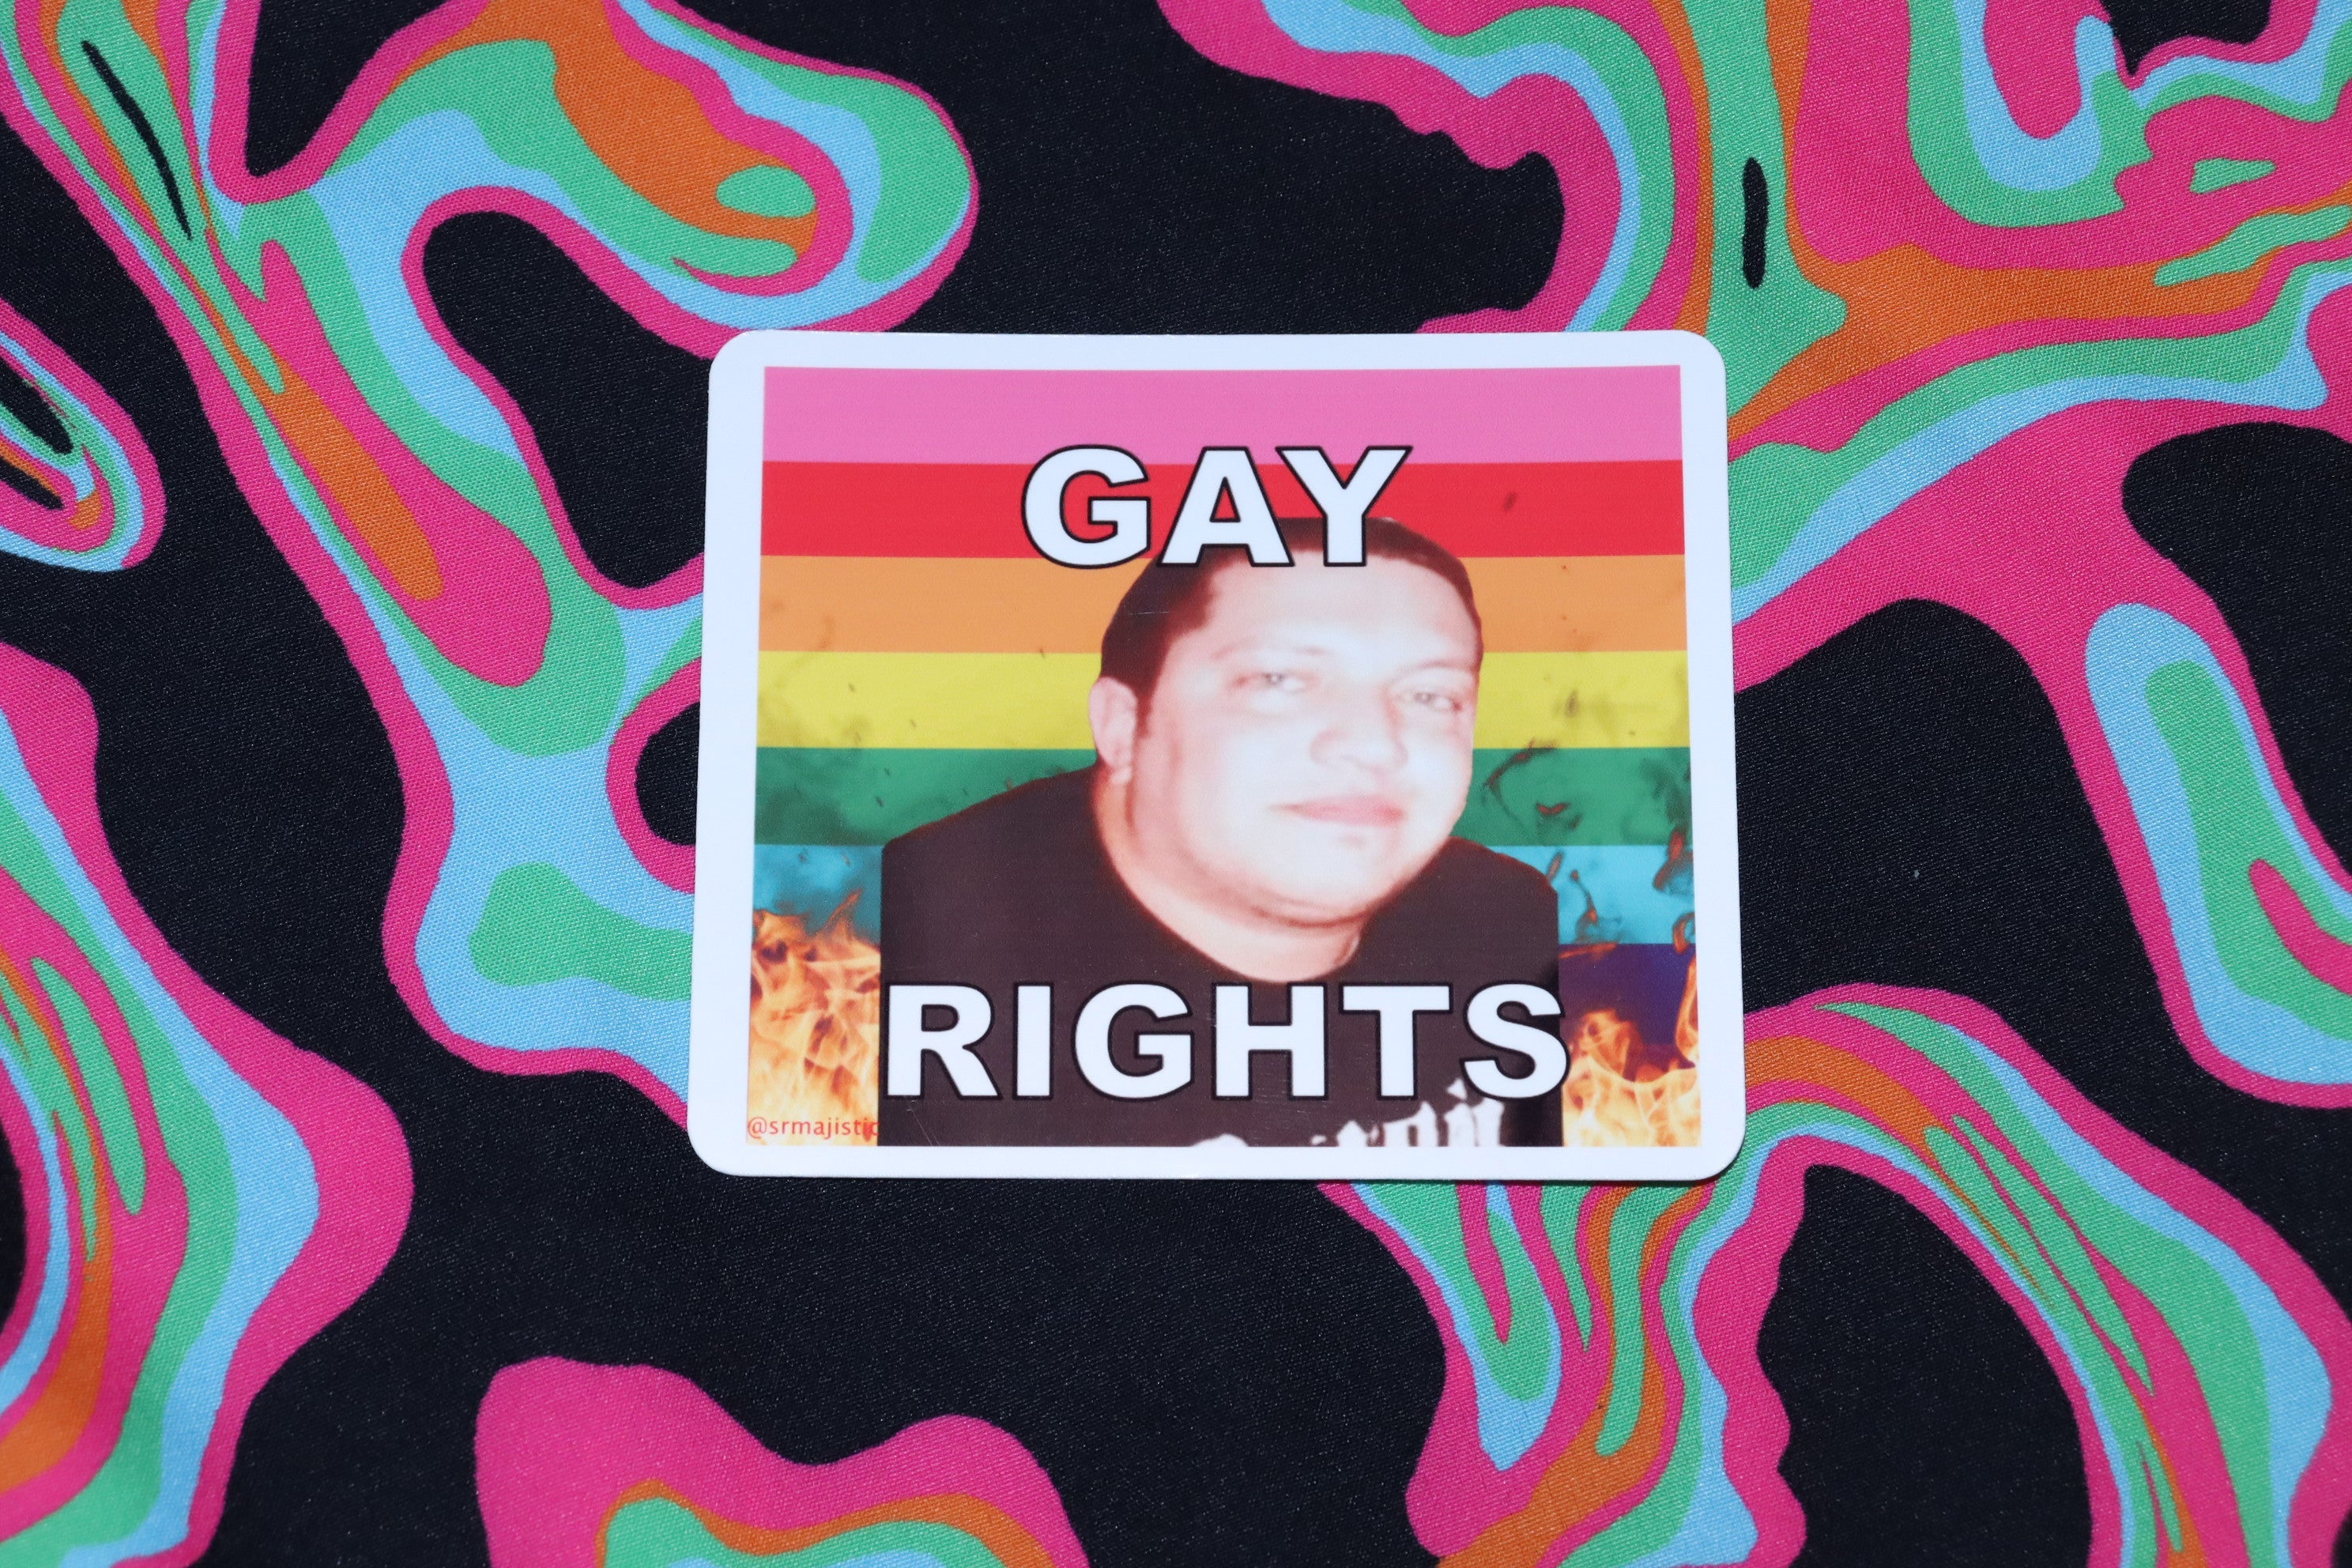 Flaming Gay Flag Character Stickers